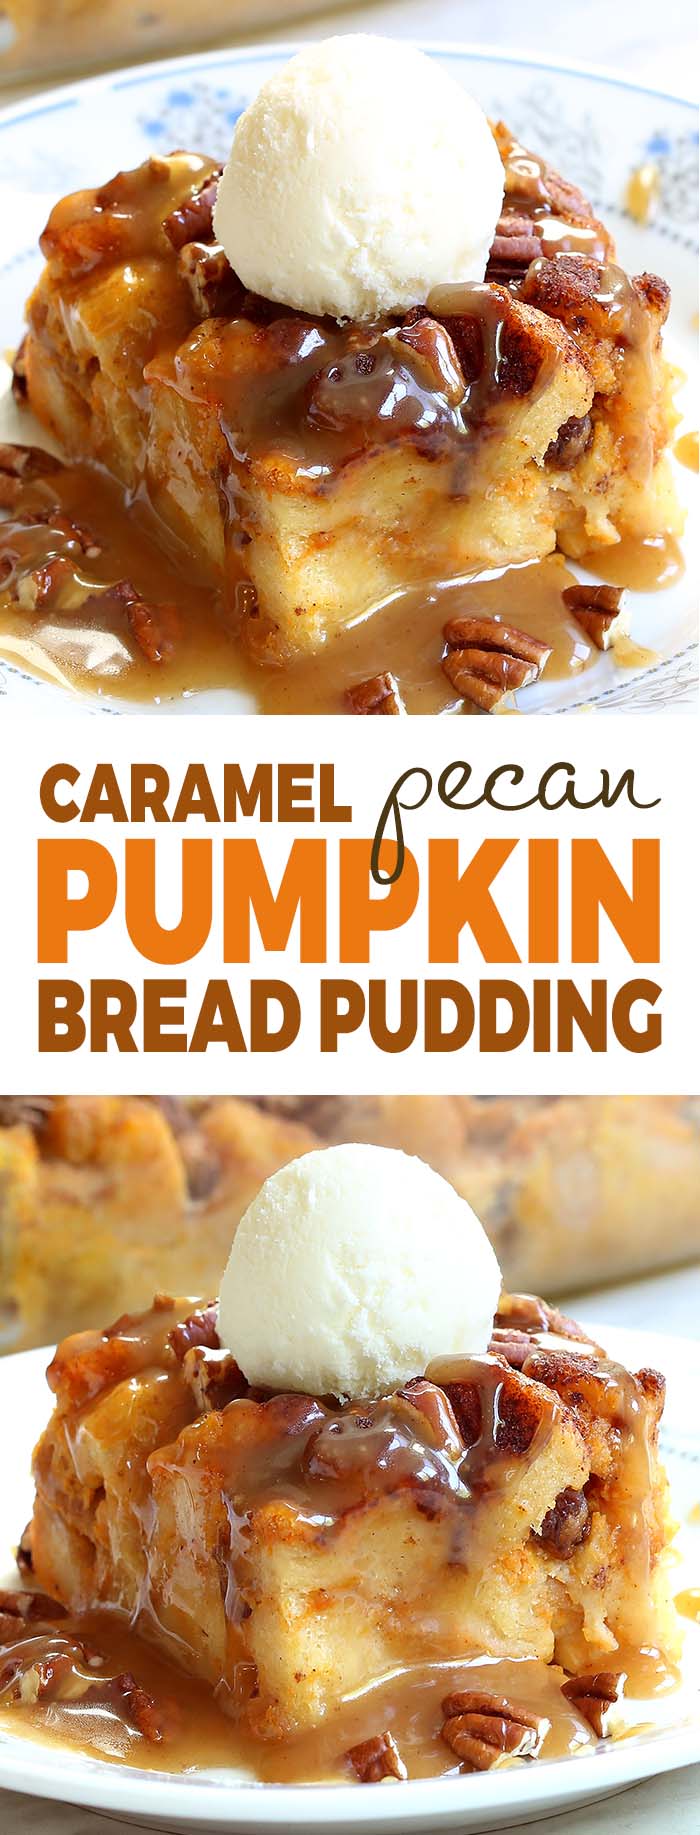 Looking for the ultimate breakfast dish for Thanksgiving?! Look no more! this super-decadent caramel pumpkin pecan bread pudding is an awesome addition to any Thanksgiving table.